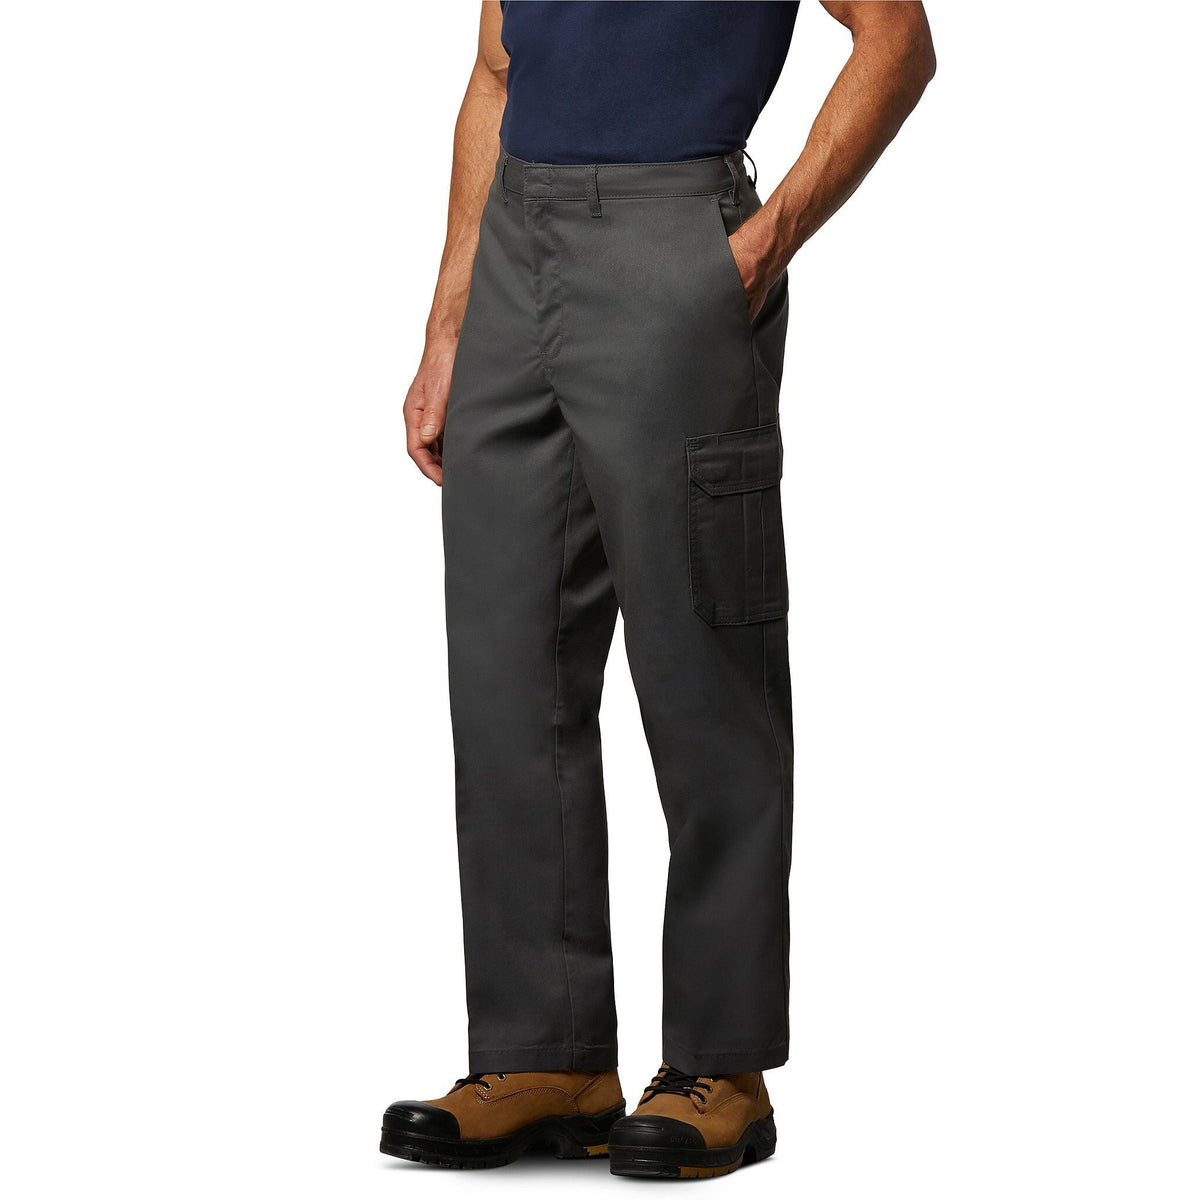 Men's Ripstop Driftwood Stretch Pant - Charcoal